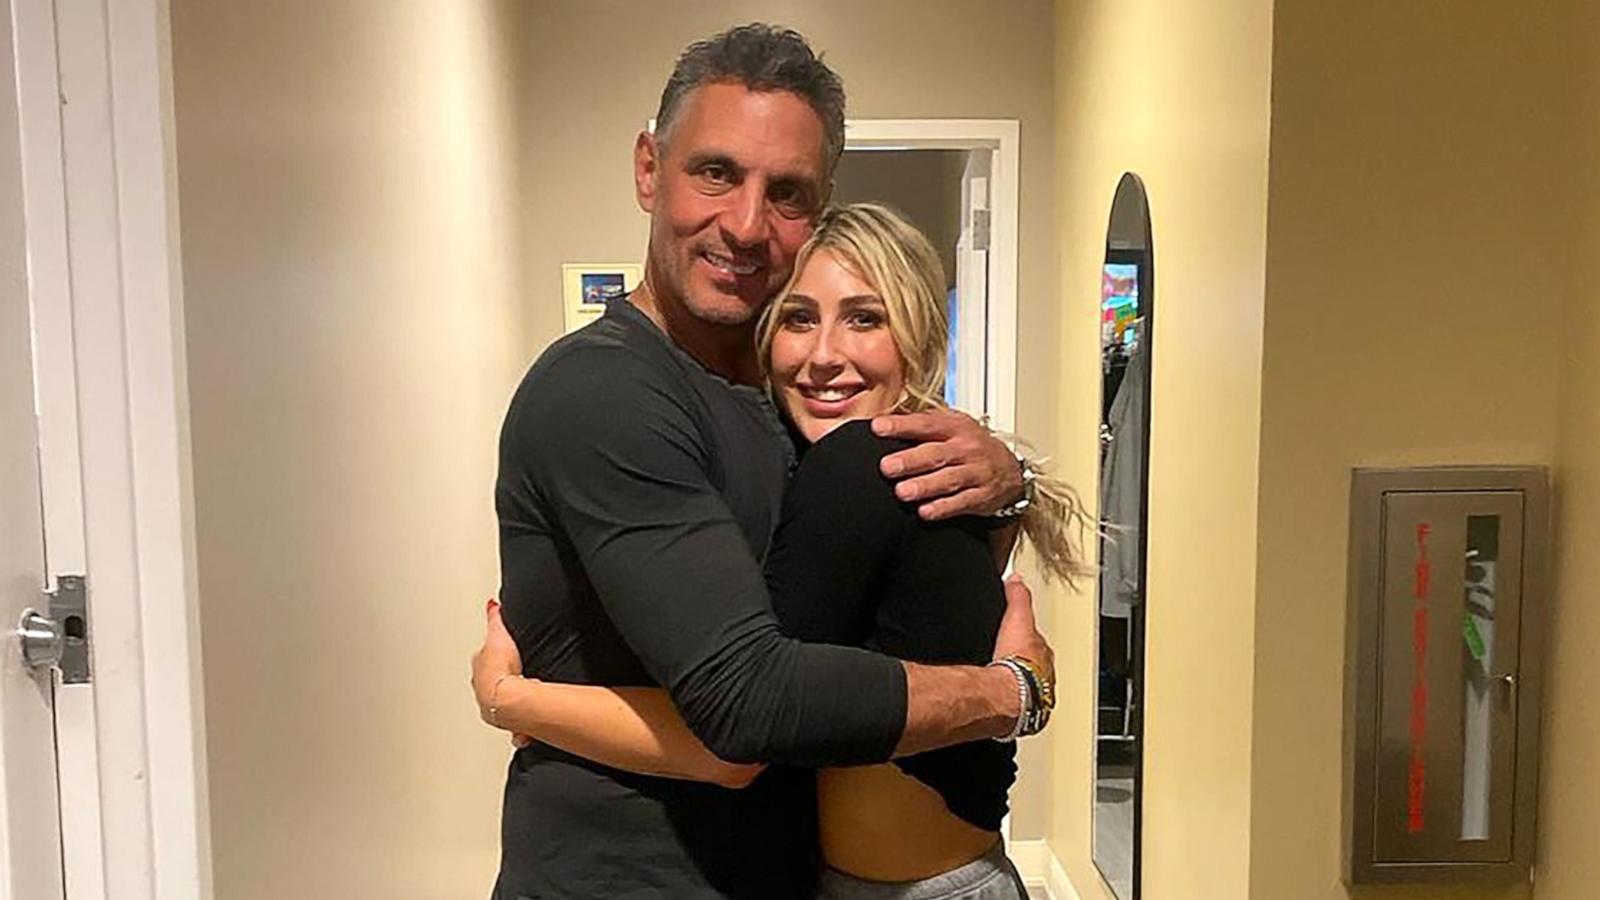 PHOTO: Emma Slater shared a photo with her former "Dancing with the Stars" partner Mauricio Umansky on her Instagram account.